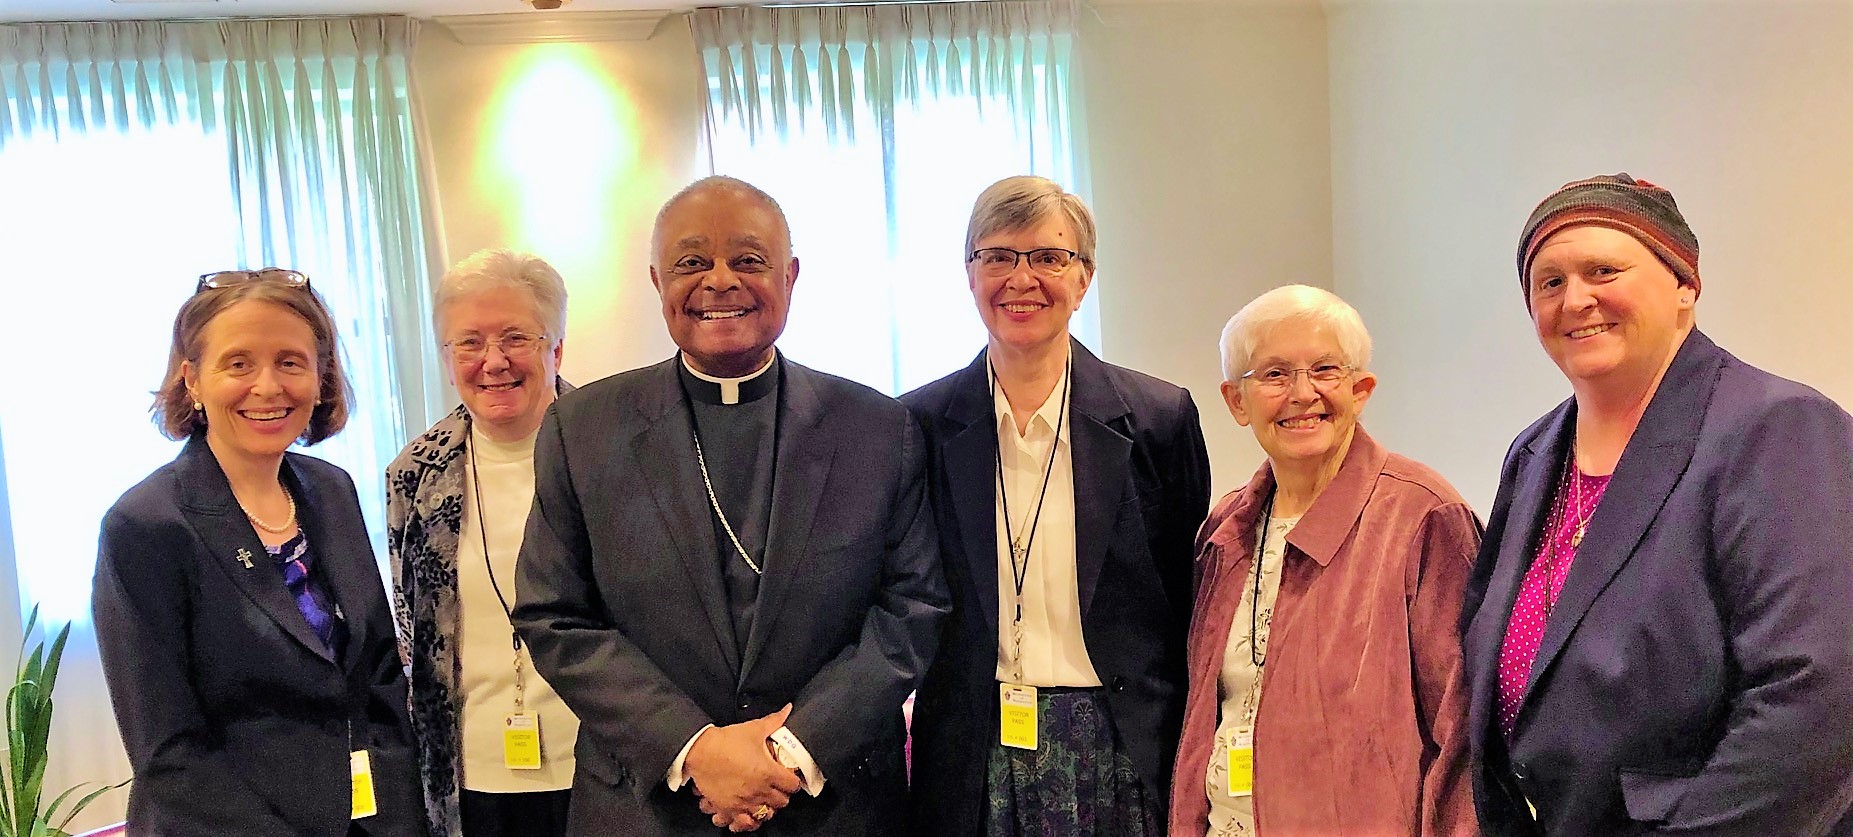 The Institute Leadership Team of the Sisters of Mercy of the Americas with Archbishop Wilton Gregory, the first African-American Cardinal from the United States